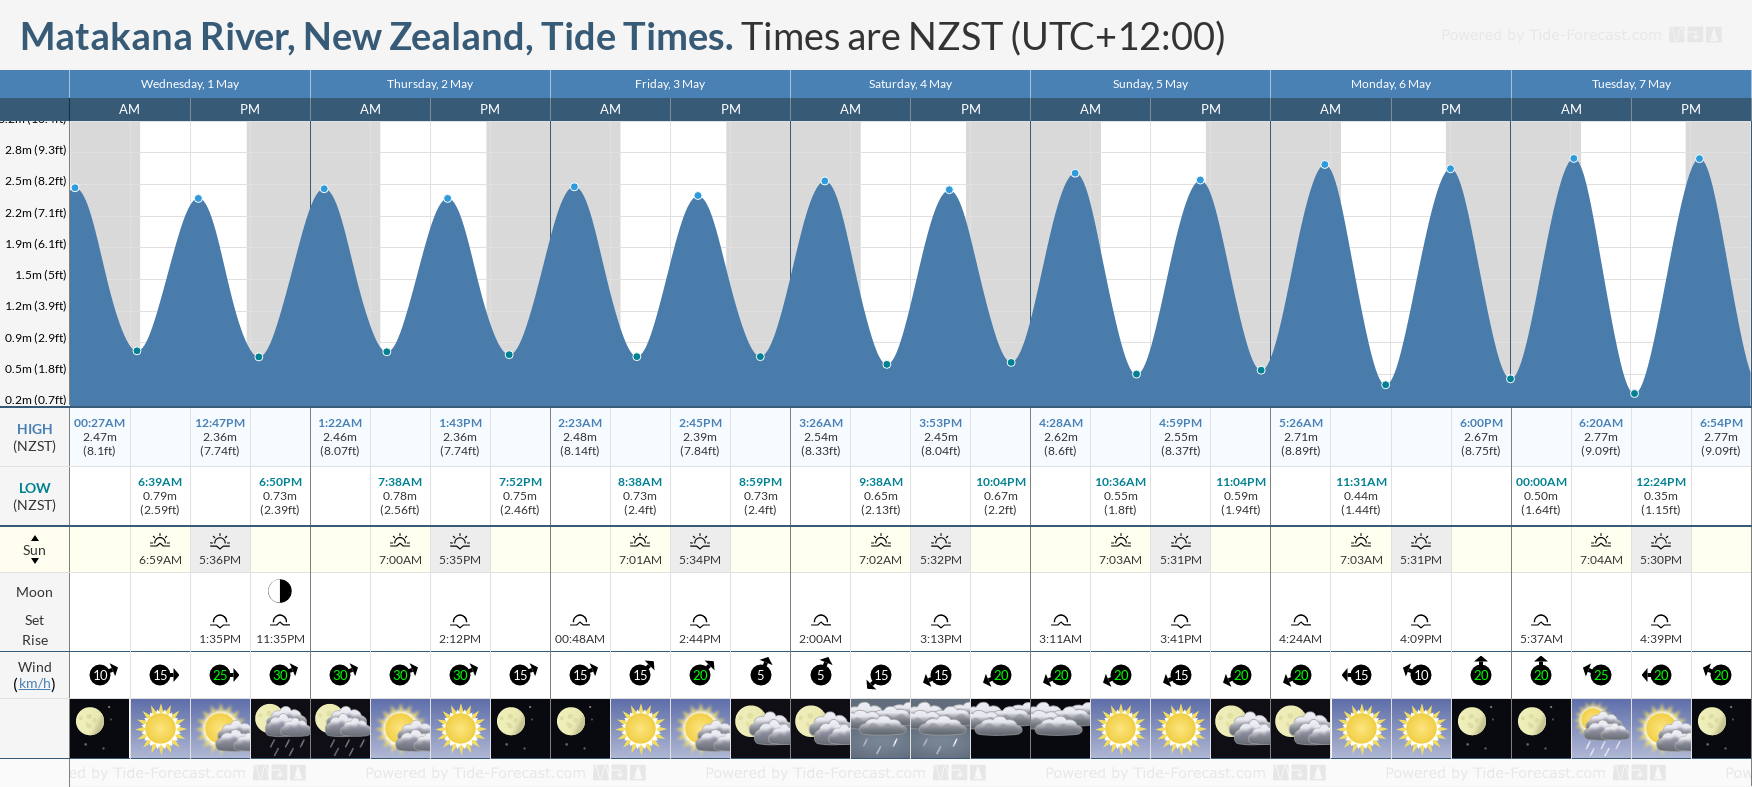 Matakana River, New Zealand Tide Chart including high and low tide tide times for the next 7 days